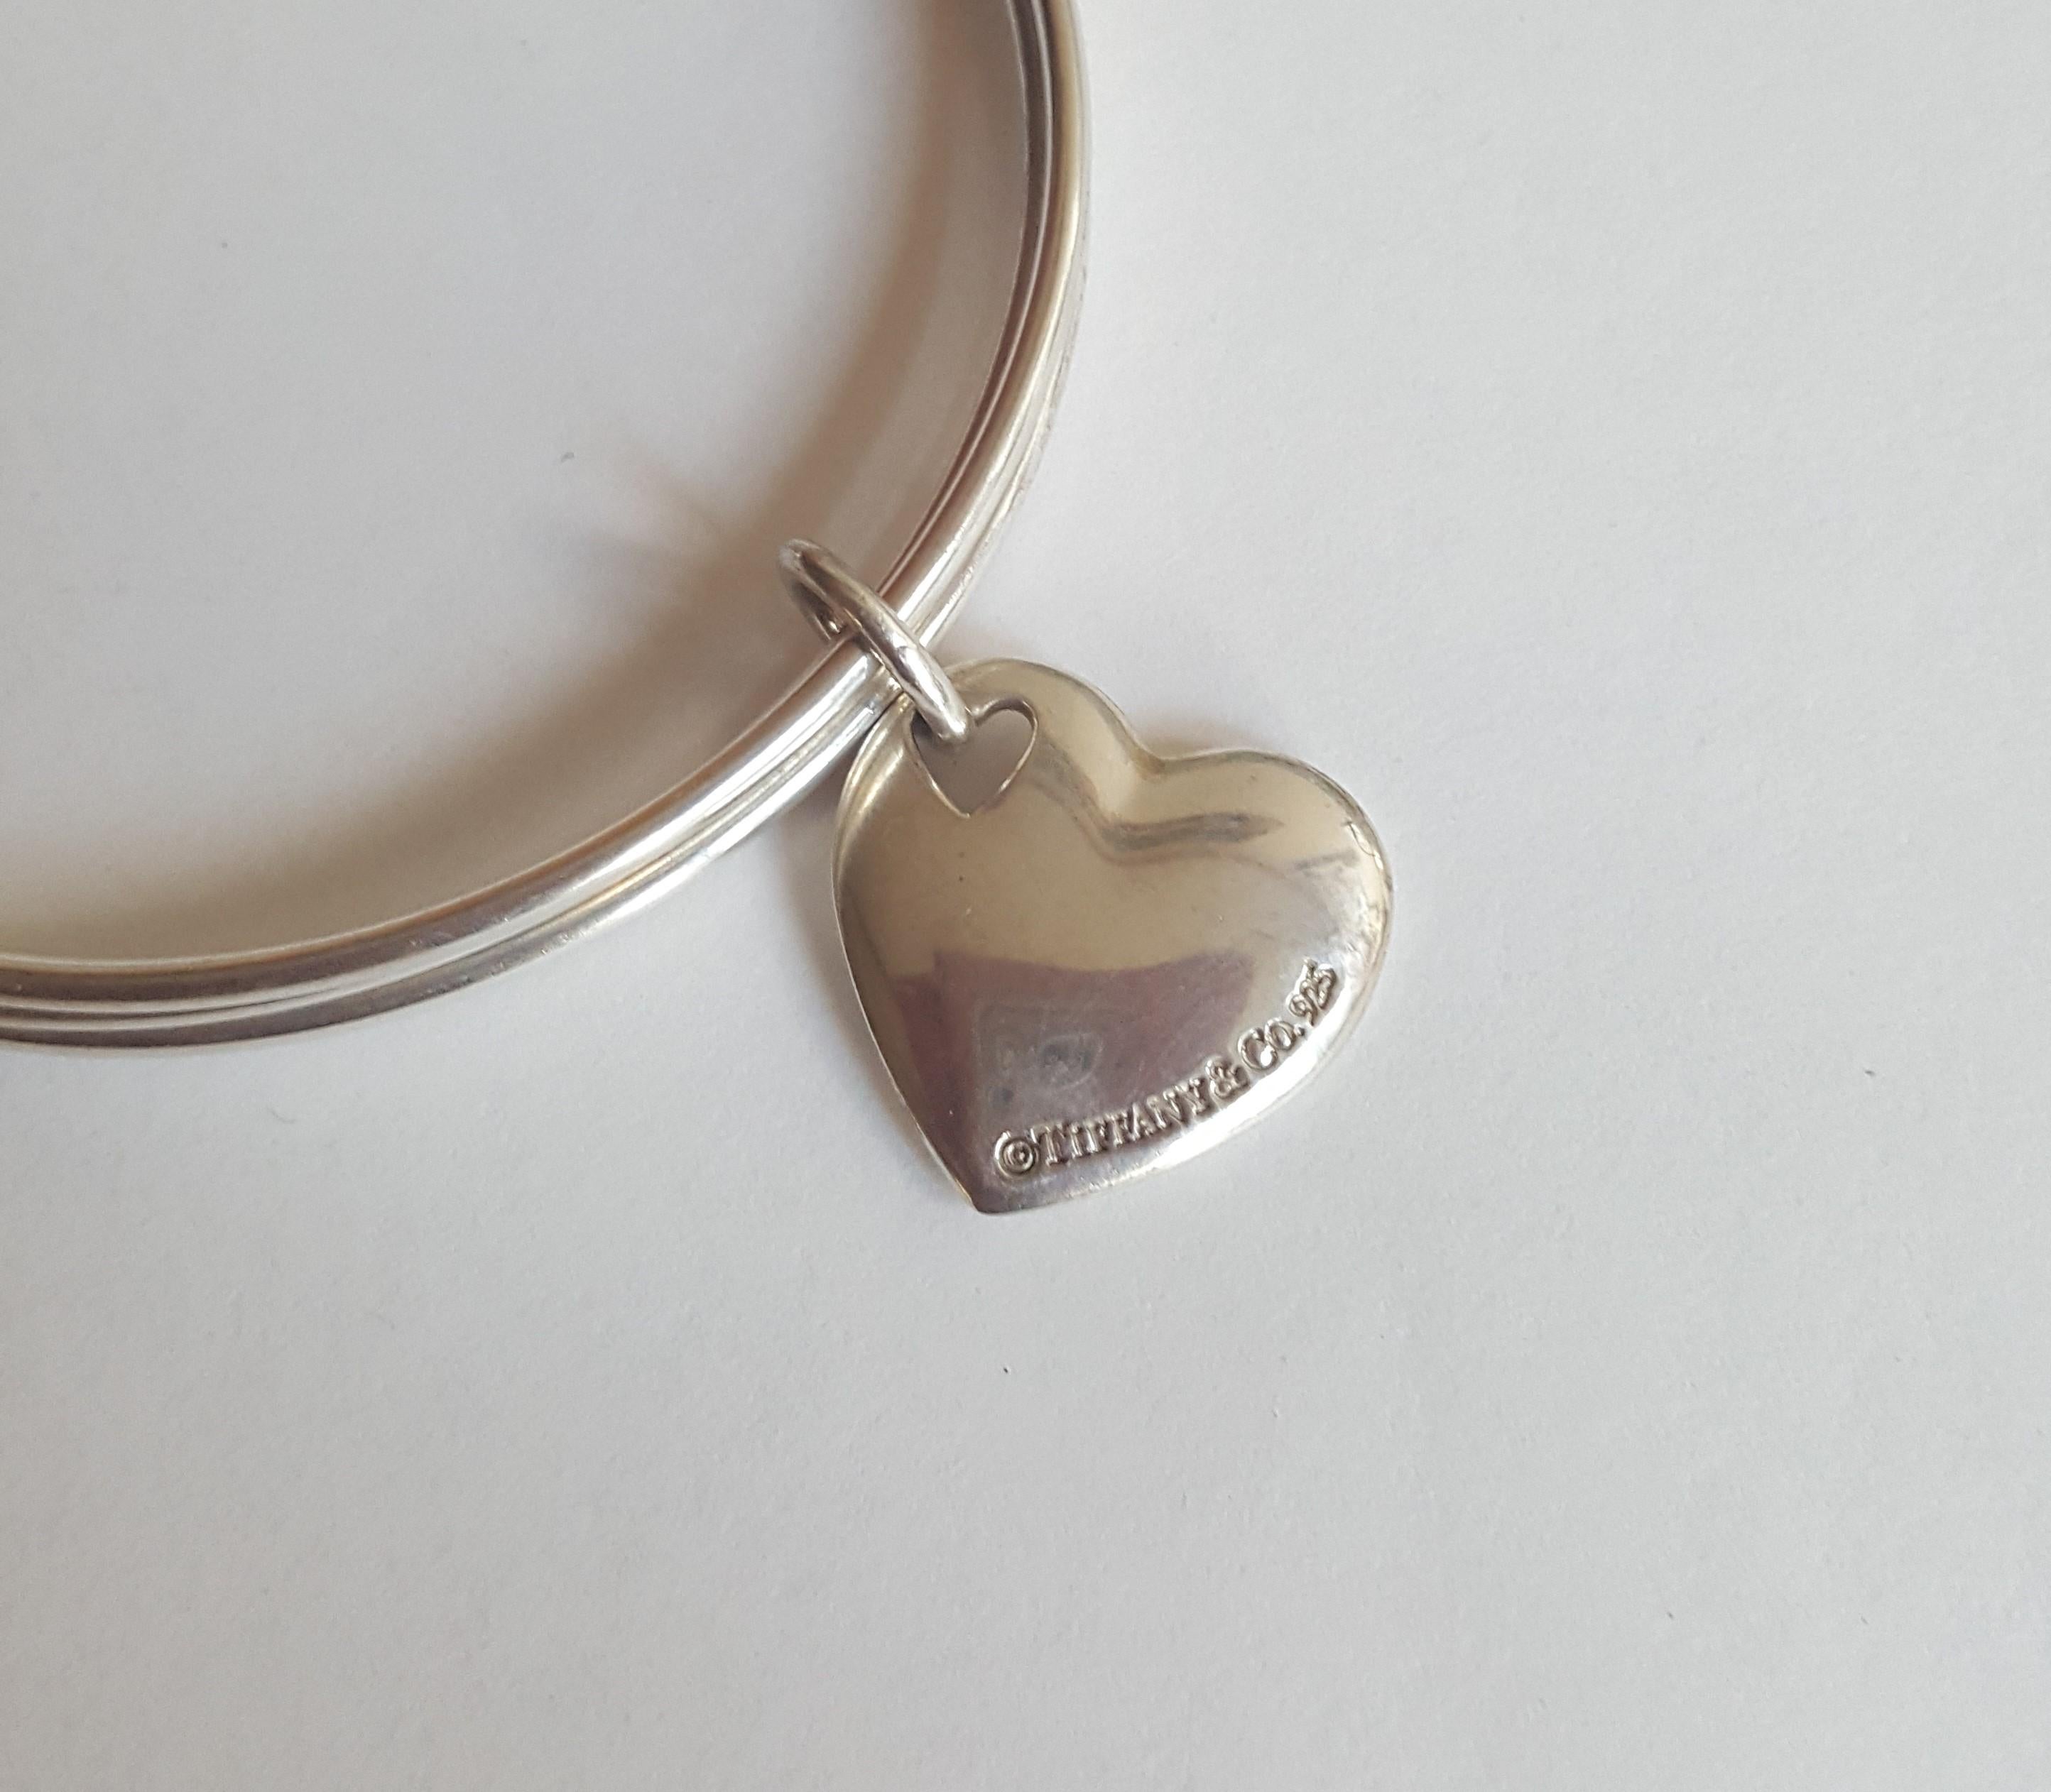 Moderne Authentique Tiffany & Co Silver Trio Bangles with Tilted Heart Charm, Retired Item (en anglais seulement) en vente